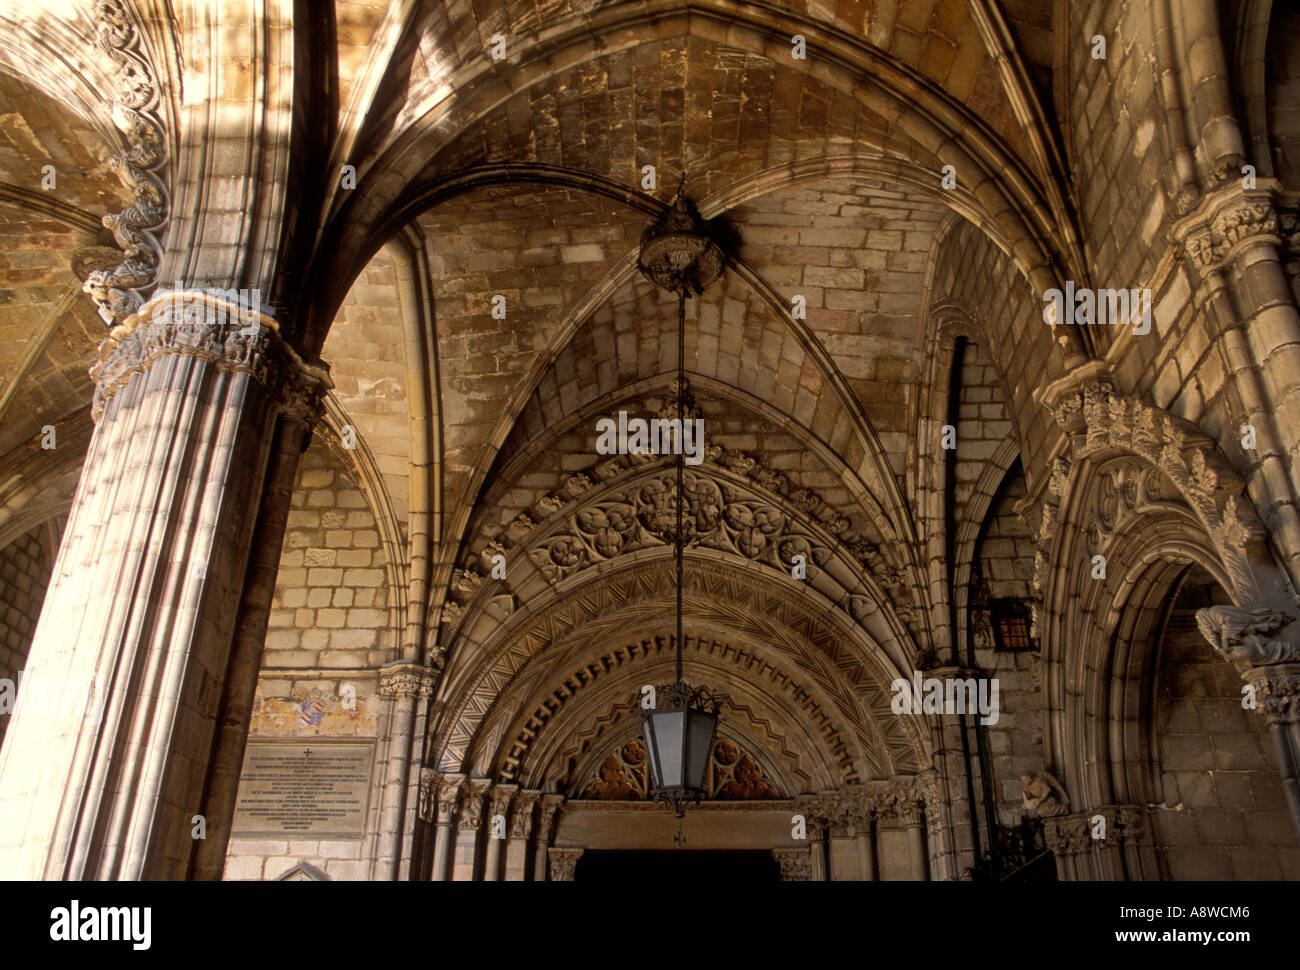 cloister, vaulted ceiling, Cathedral of the Holy Cross and Saint Eulalia, Roman Catholic cathedral, Roman Catholicism, Barcelona, Spain Stock Photo